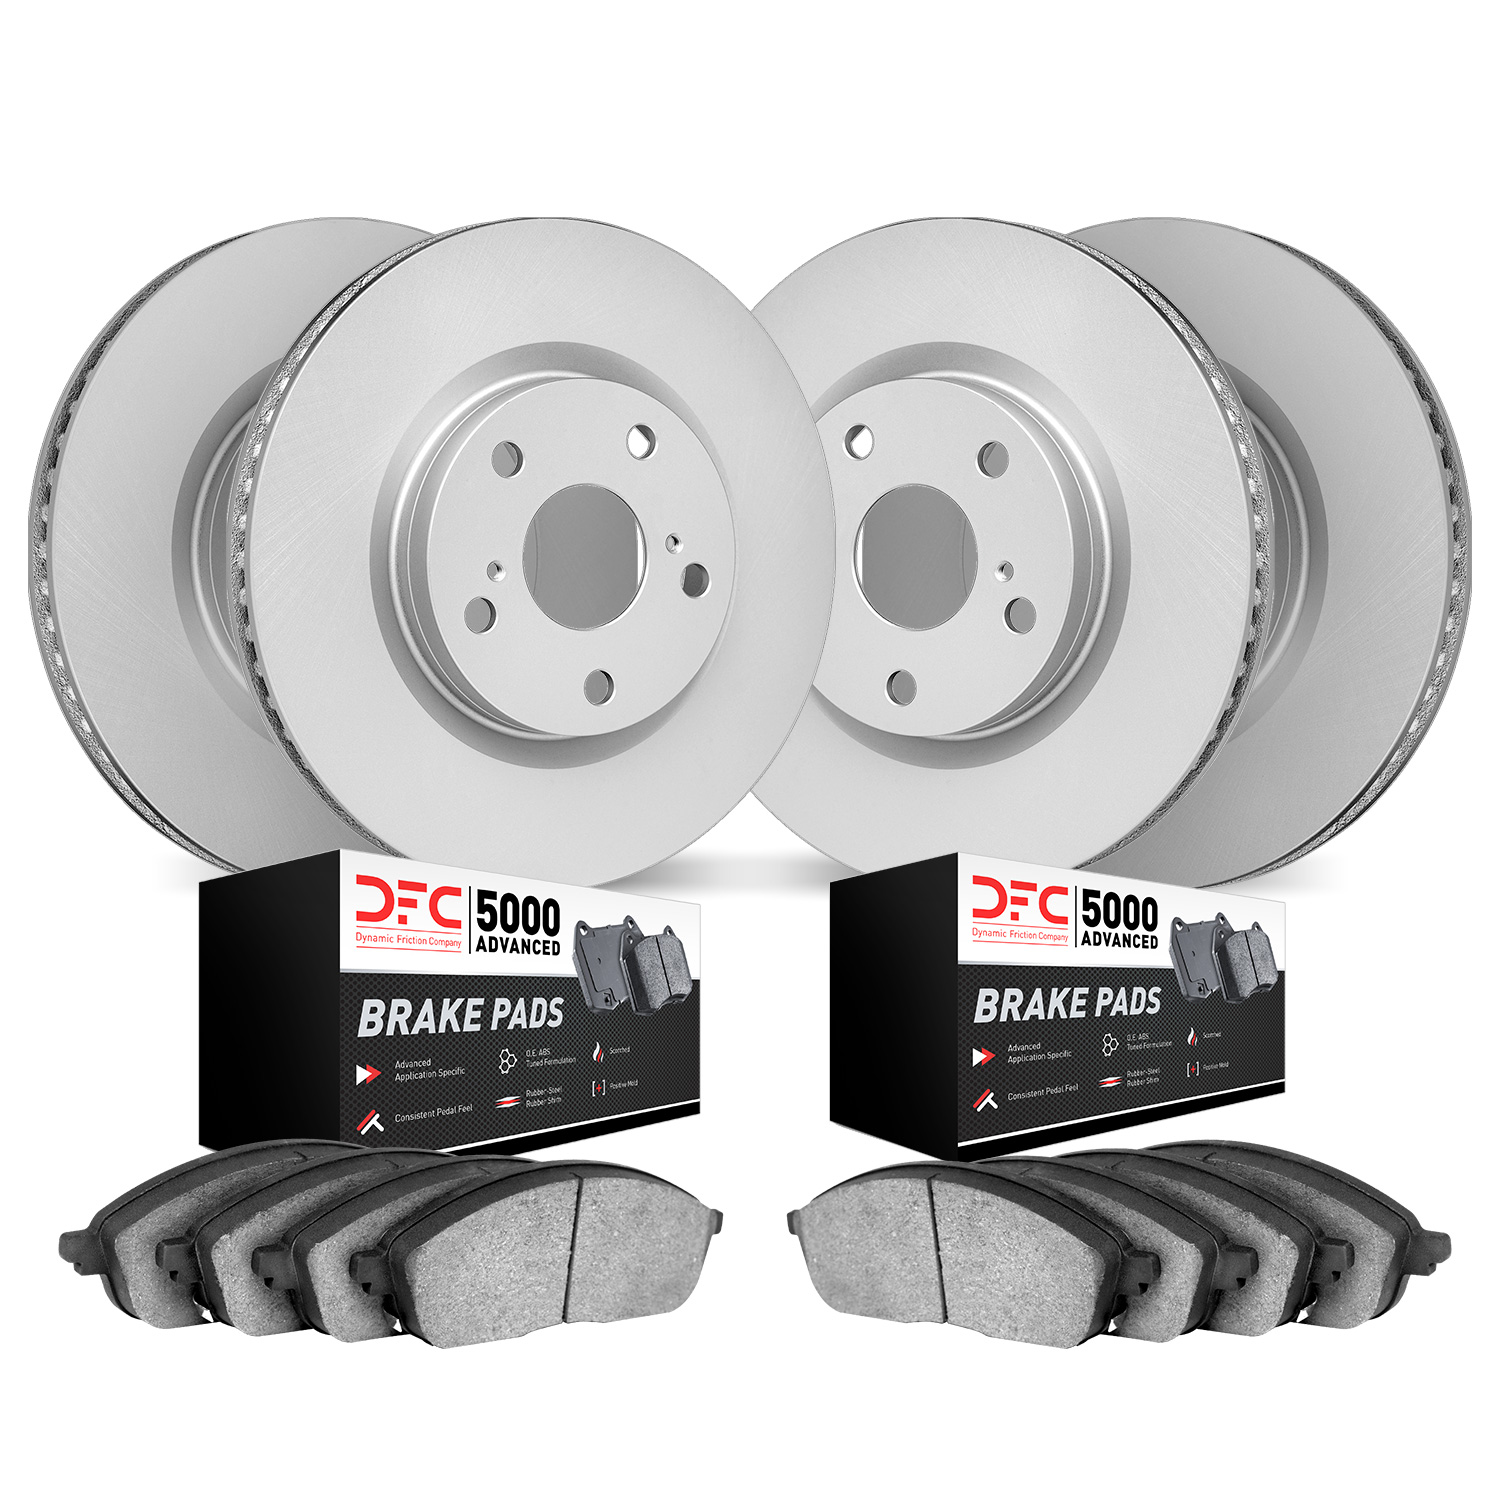 4504-46072 Geospec Brake Rotors w/5000 Advanced Brake Pads Kit, 2014-2014 GM, Position: Front and Rear